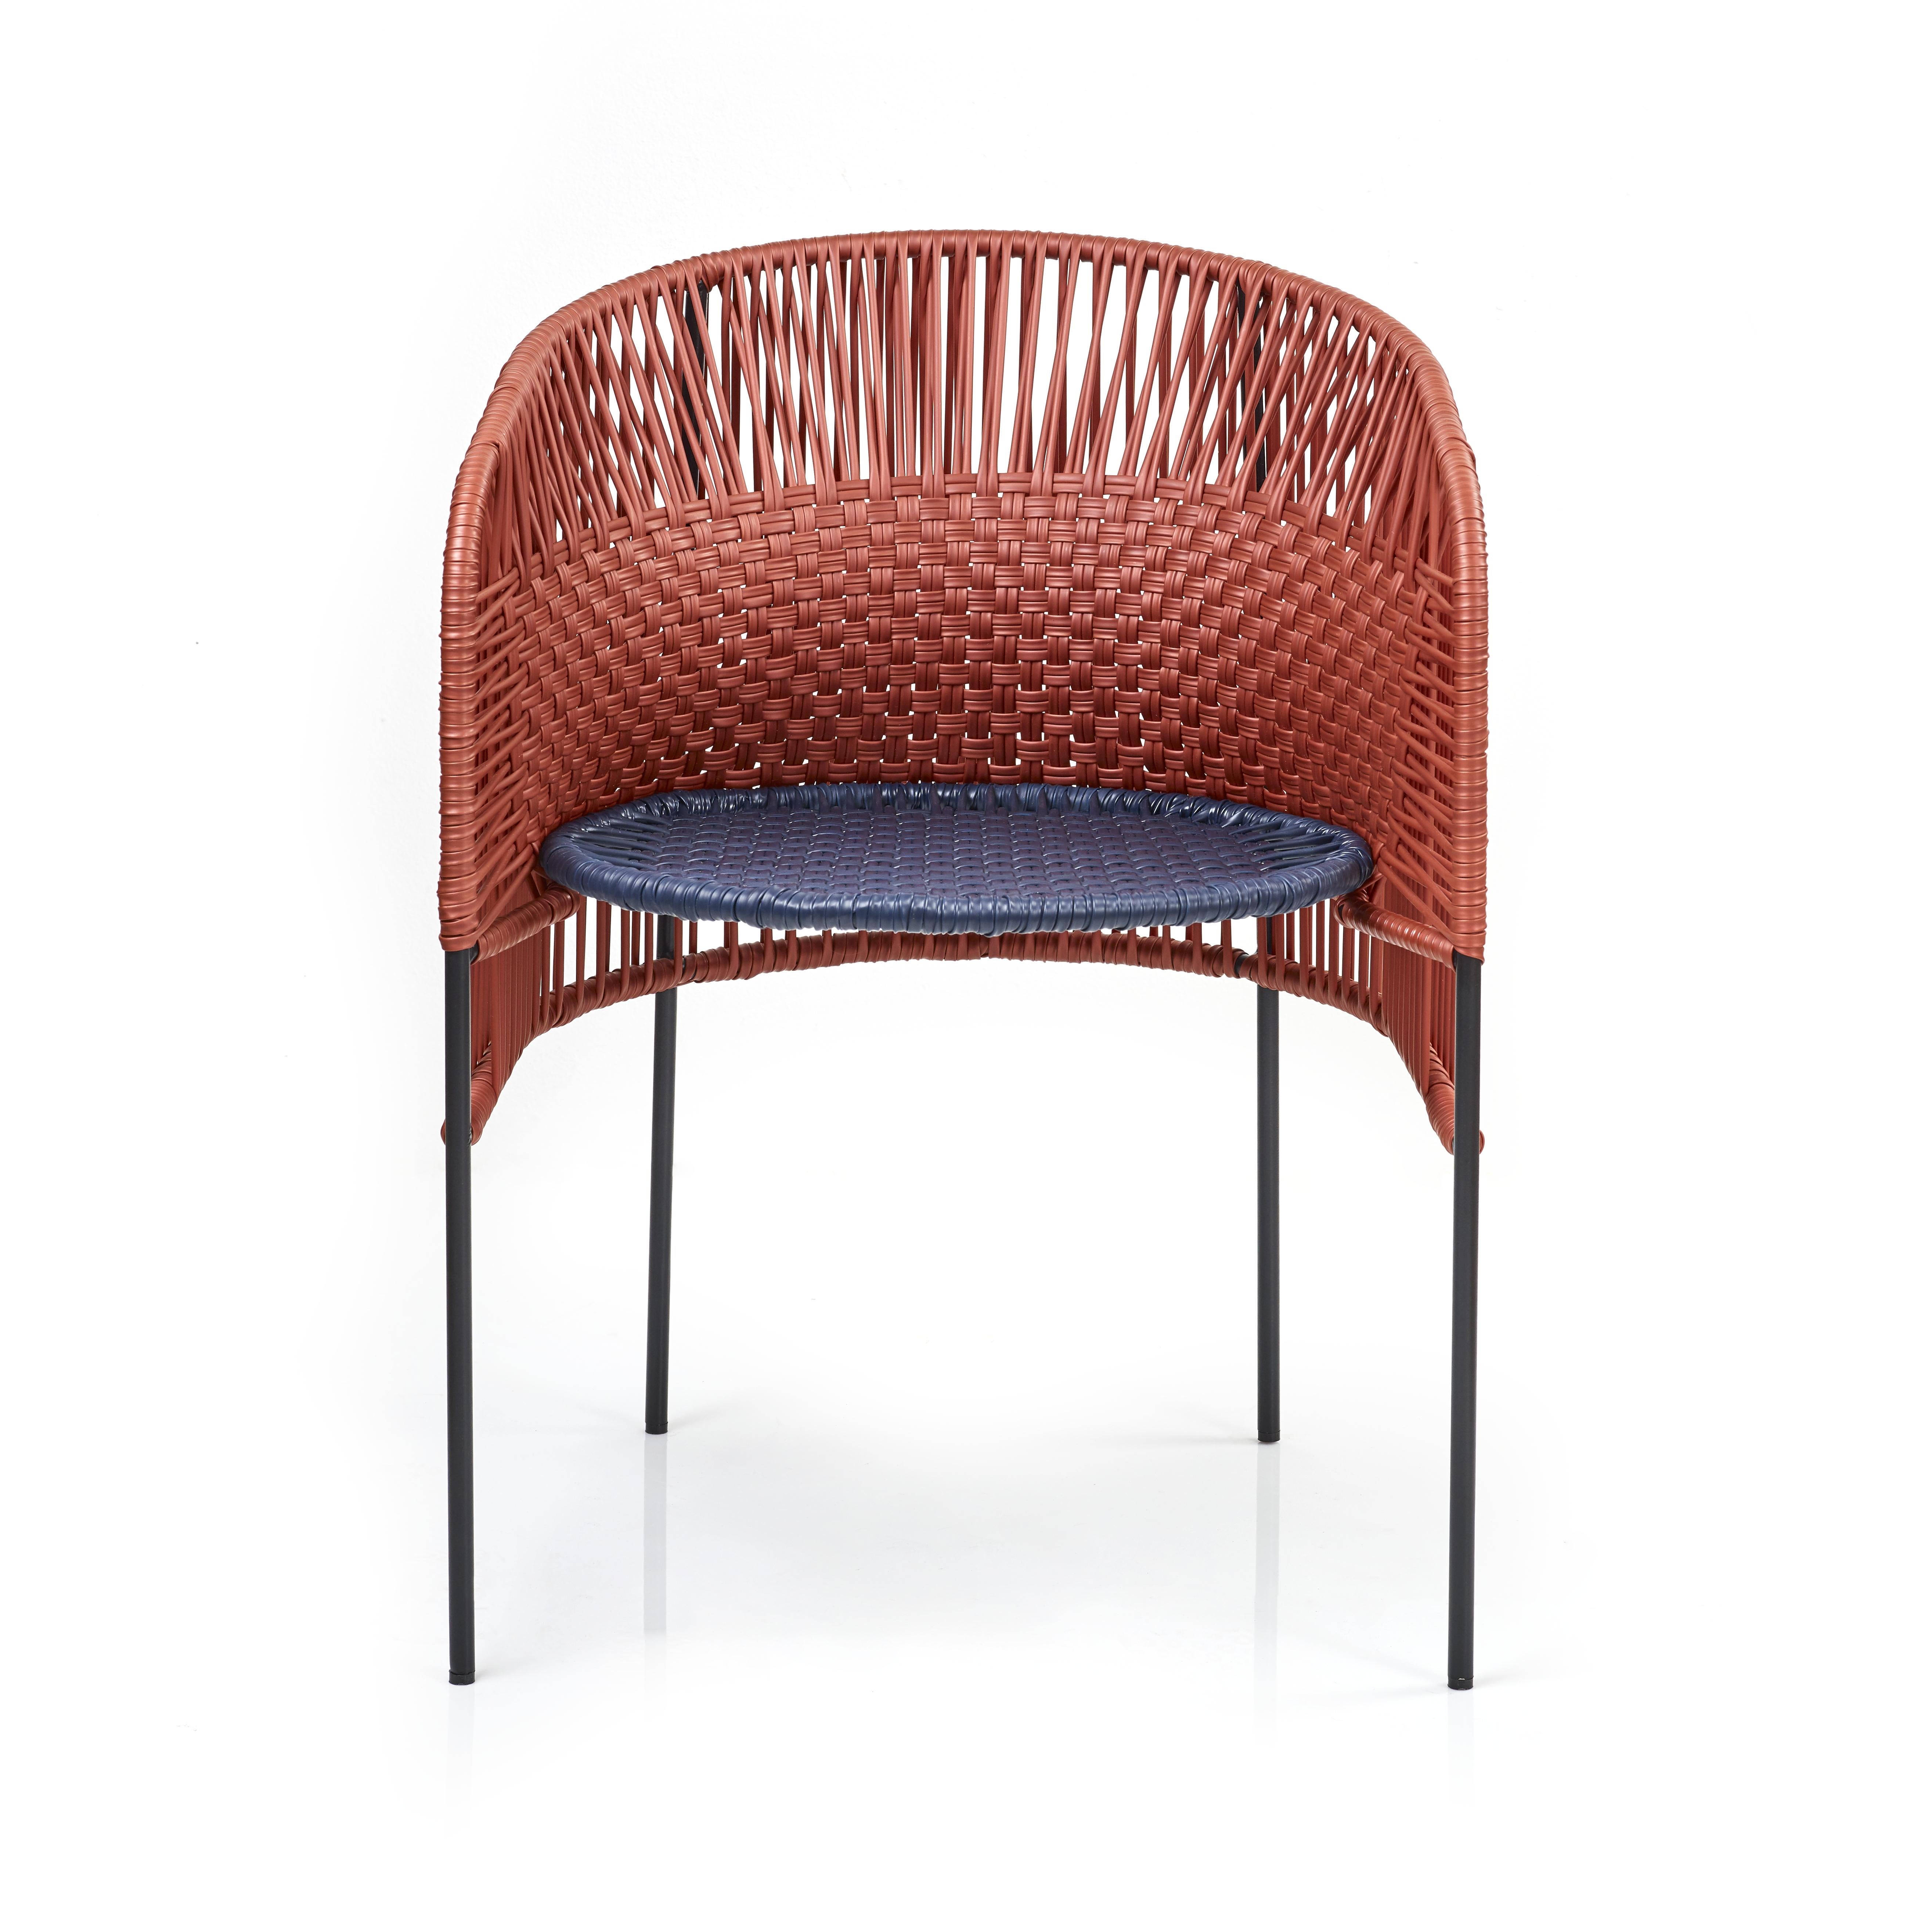 Orange Caribe chic dining chair by Sebastian Herkner
Materials: Galvanized and powder-coated tubular steel. PVC strings are made from recycled plastic.
Technique: Made from recycled plastic and weaved by local craftspeople in Colombia. 
Dimensions: